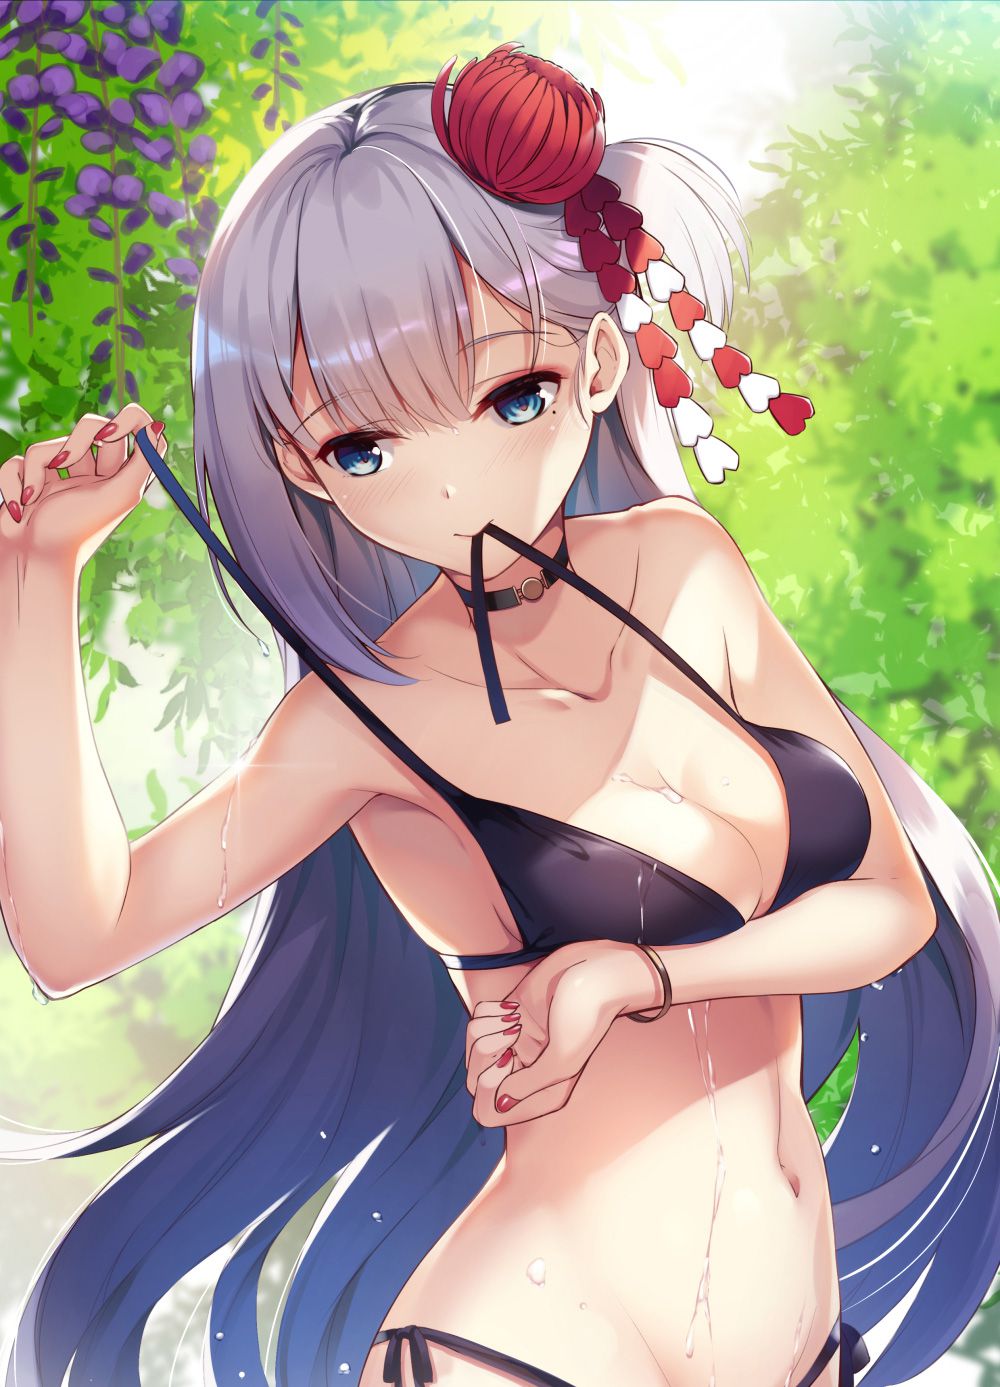 Secondary image of a silver-haired girl that 4 50 photos [Ero/non-erotic] 44